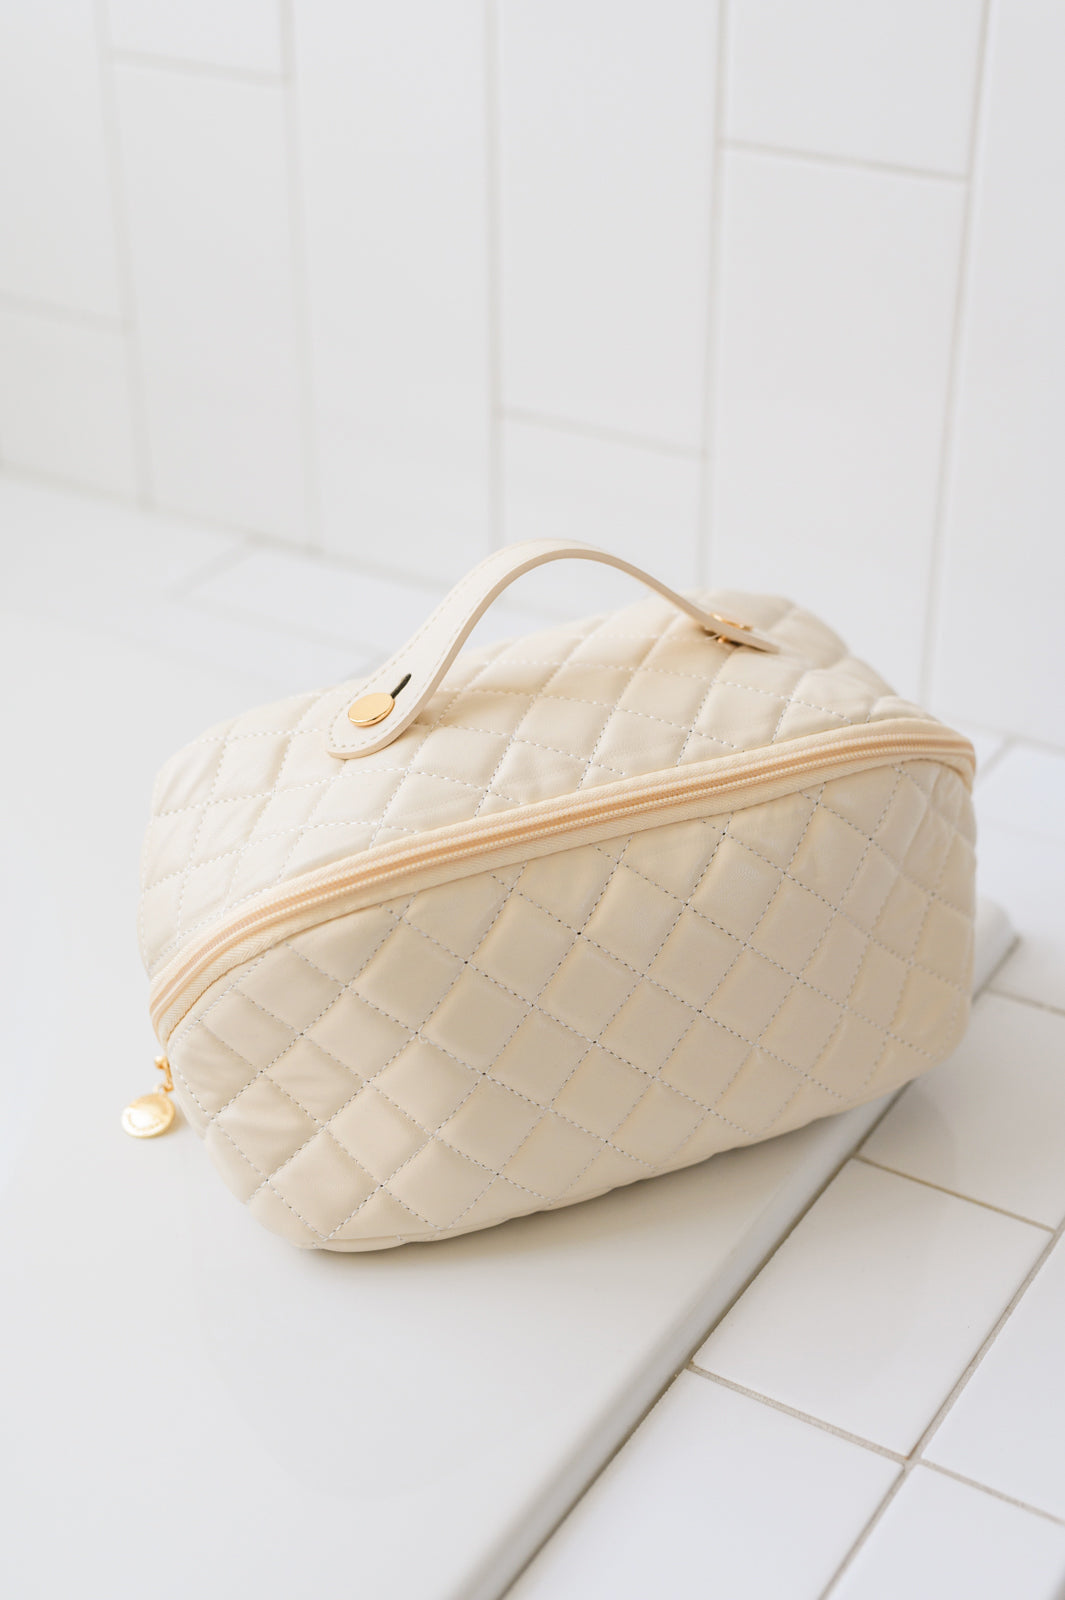 Large Capacity Quilted Makeup Bag in Cream-Handbags-Ave Shops-Market Street Nest, Fashionable Clothing, Shoes and Home Décor Located in Mabank, TX